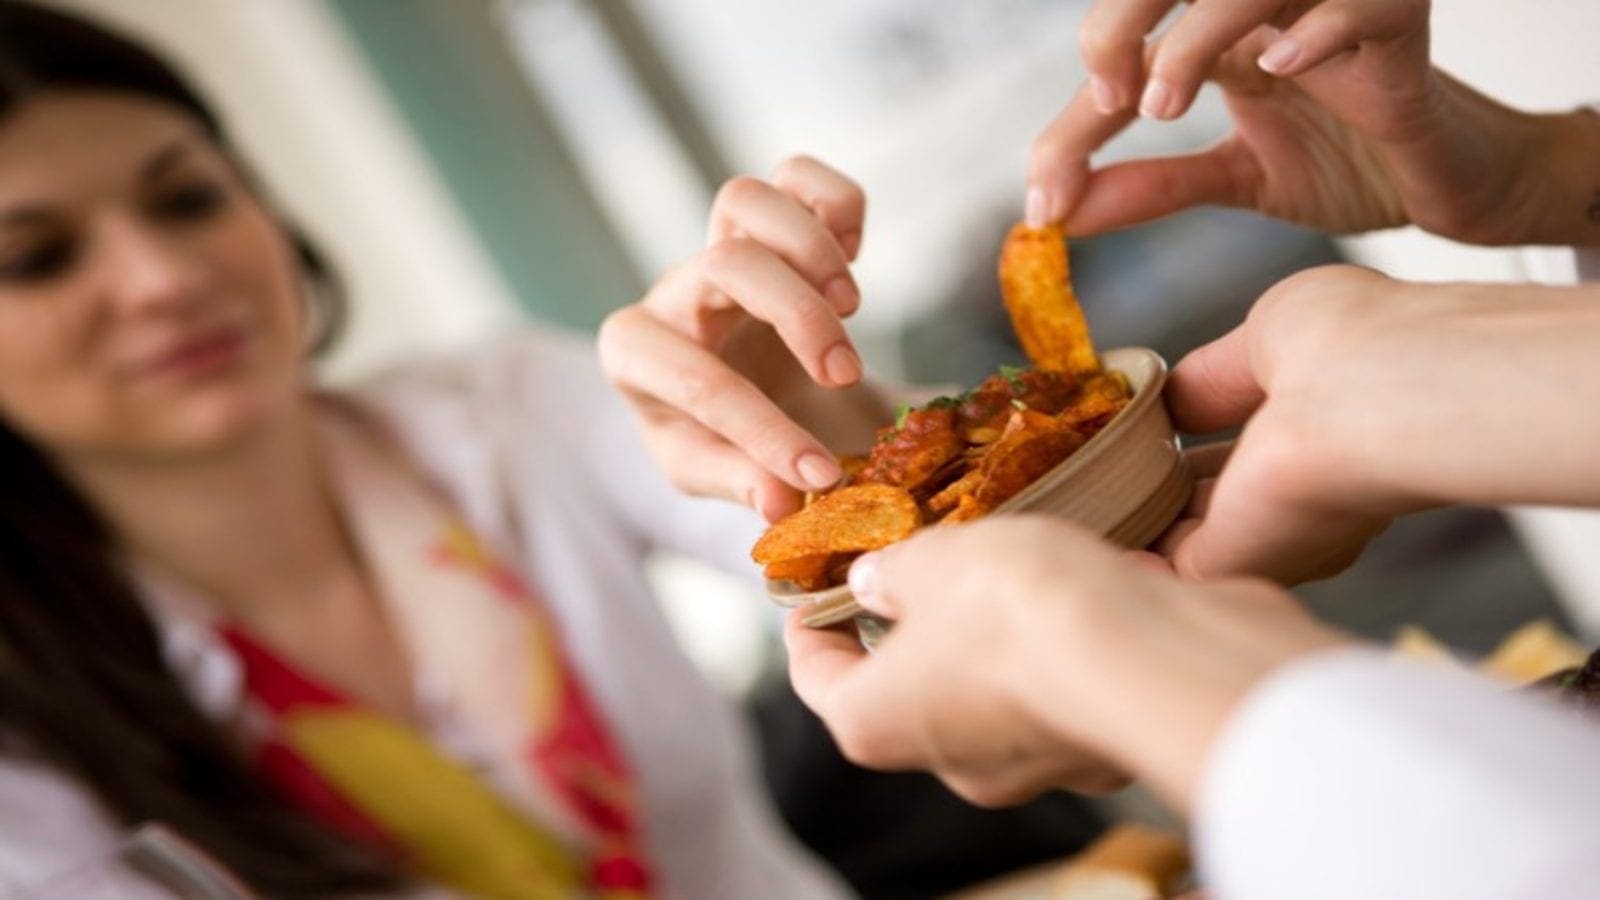 Demand for ‘clean-label’ snacks spikes in India as consumers become increasingly health conscious- Mintel